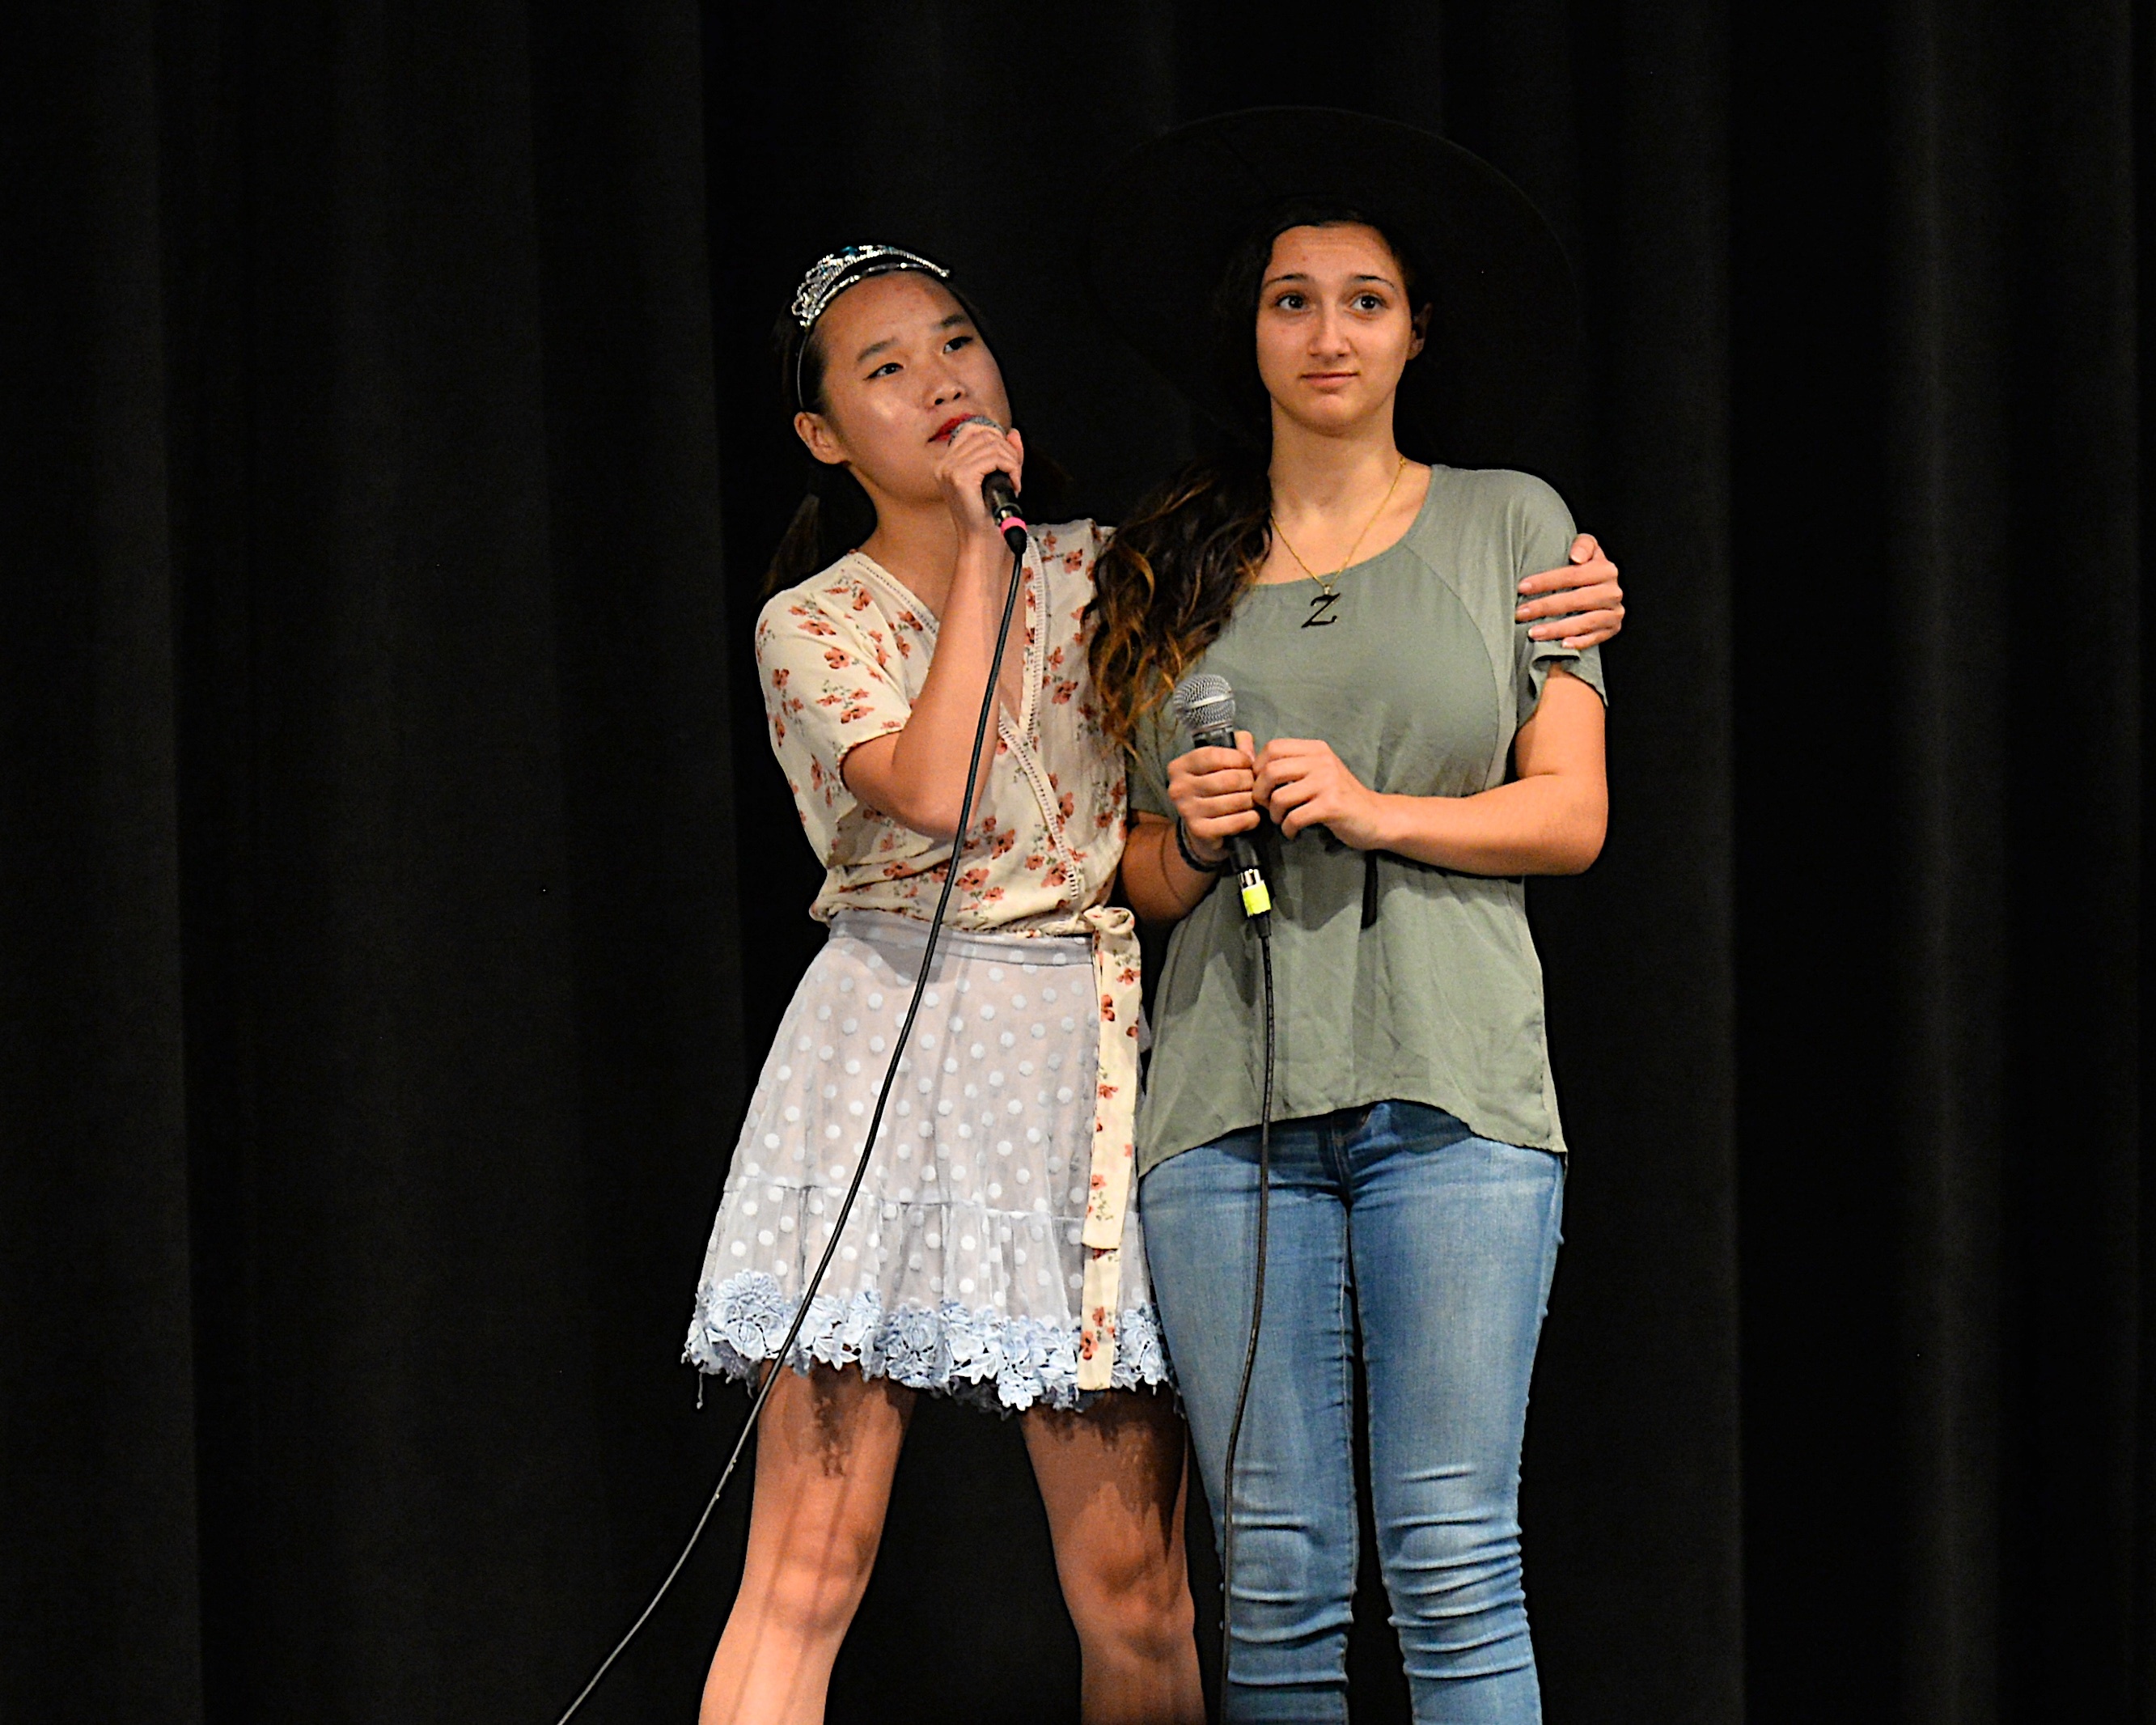 East Hampton High School students were the performers in the Bonac Broadway Bistro event on Friday at the high school. It raised money for the district's arts programs. Han Le and Alison Fioriello perform. KYRIL BROMLEY